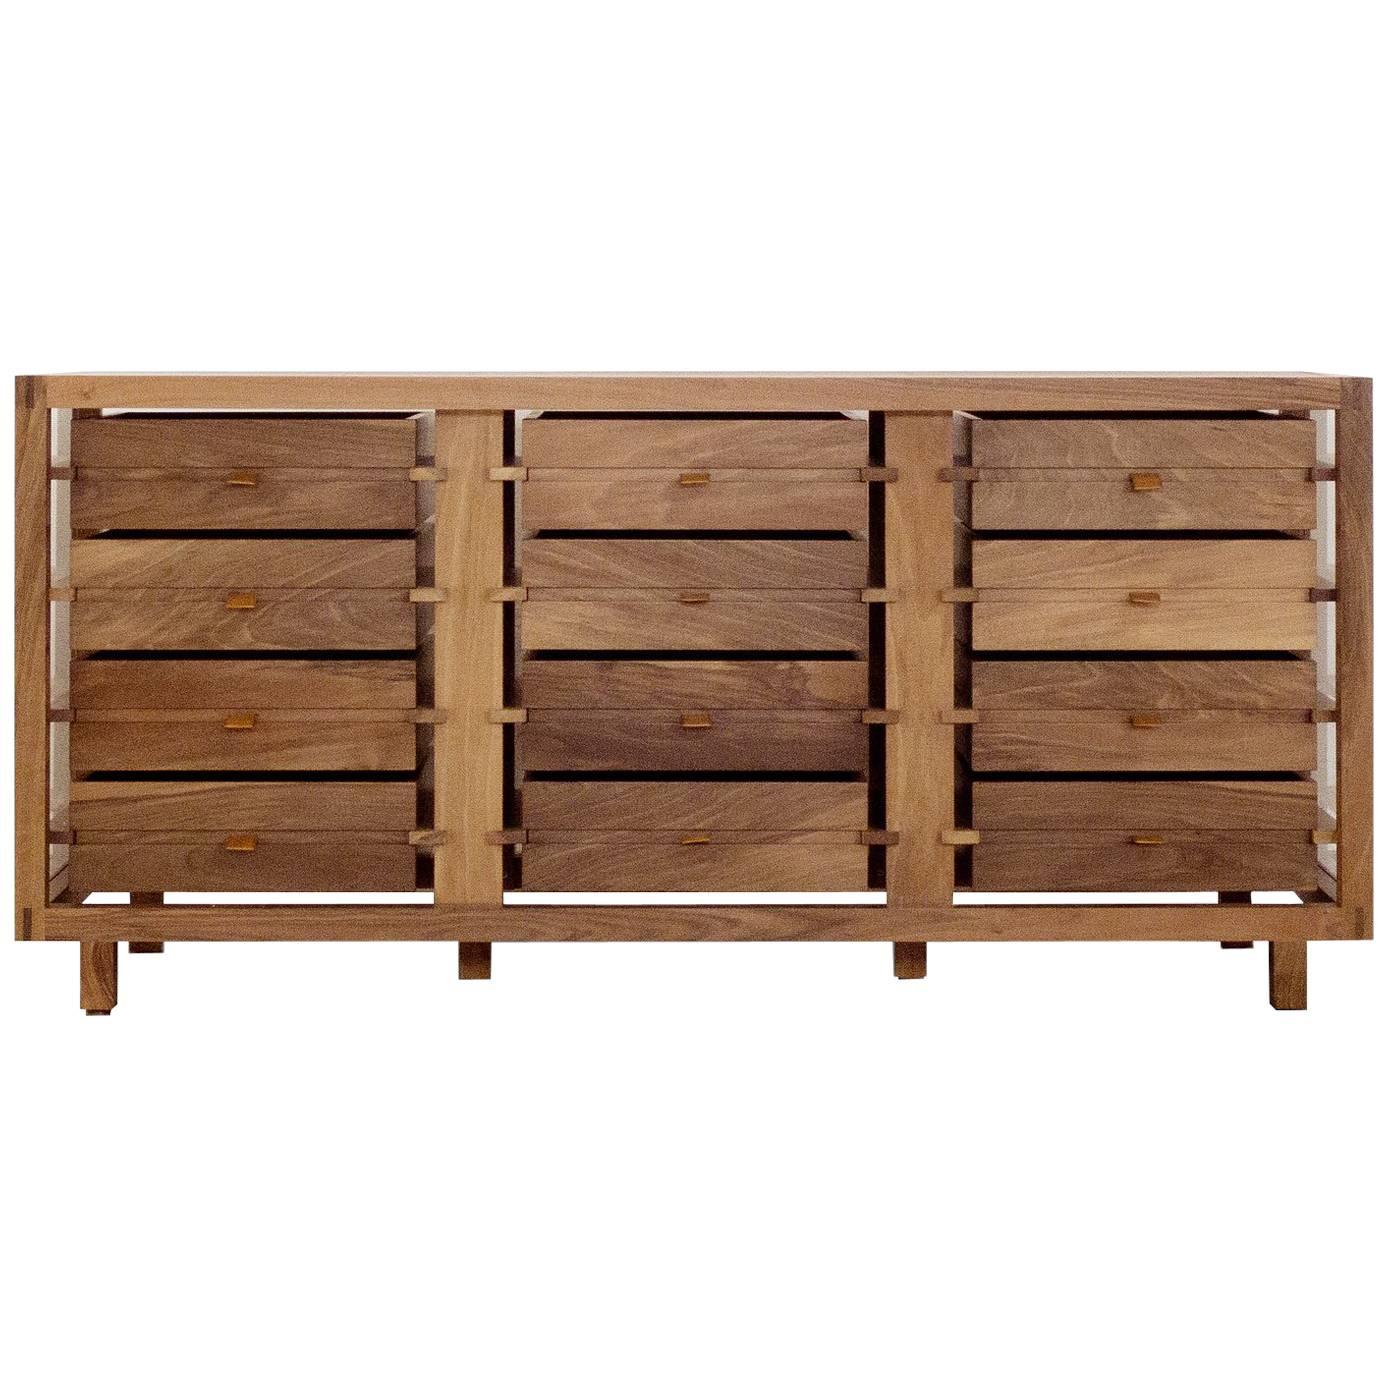 "Optimum" Glass and Walnut Chest of 12 Drawers by Stephane Lebrun for Dessie' For Sale